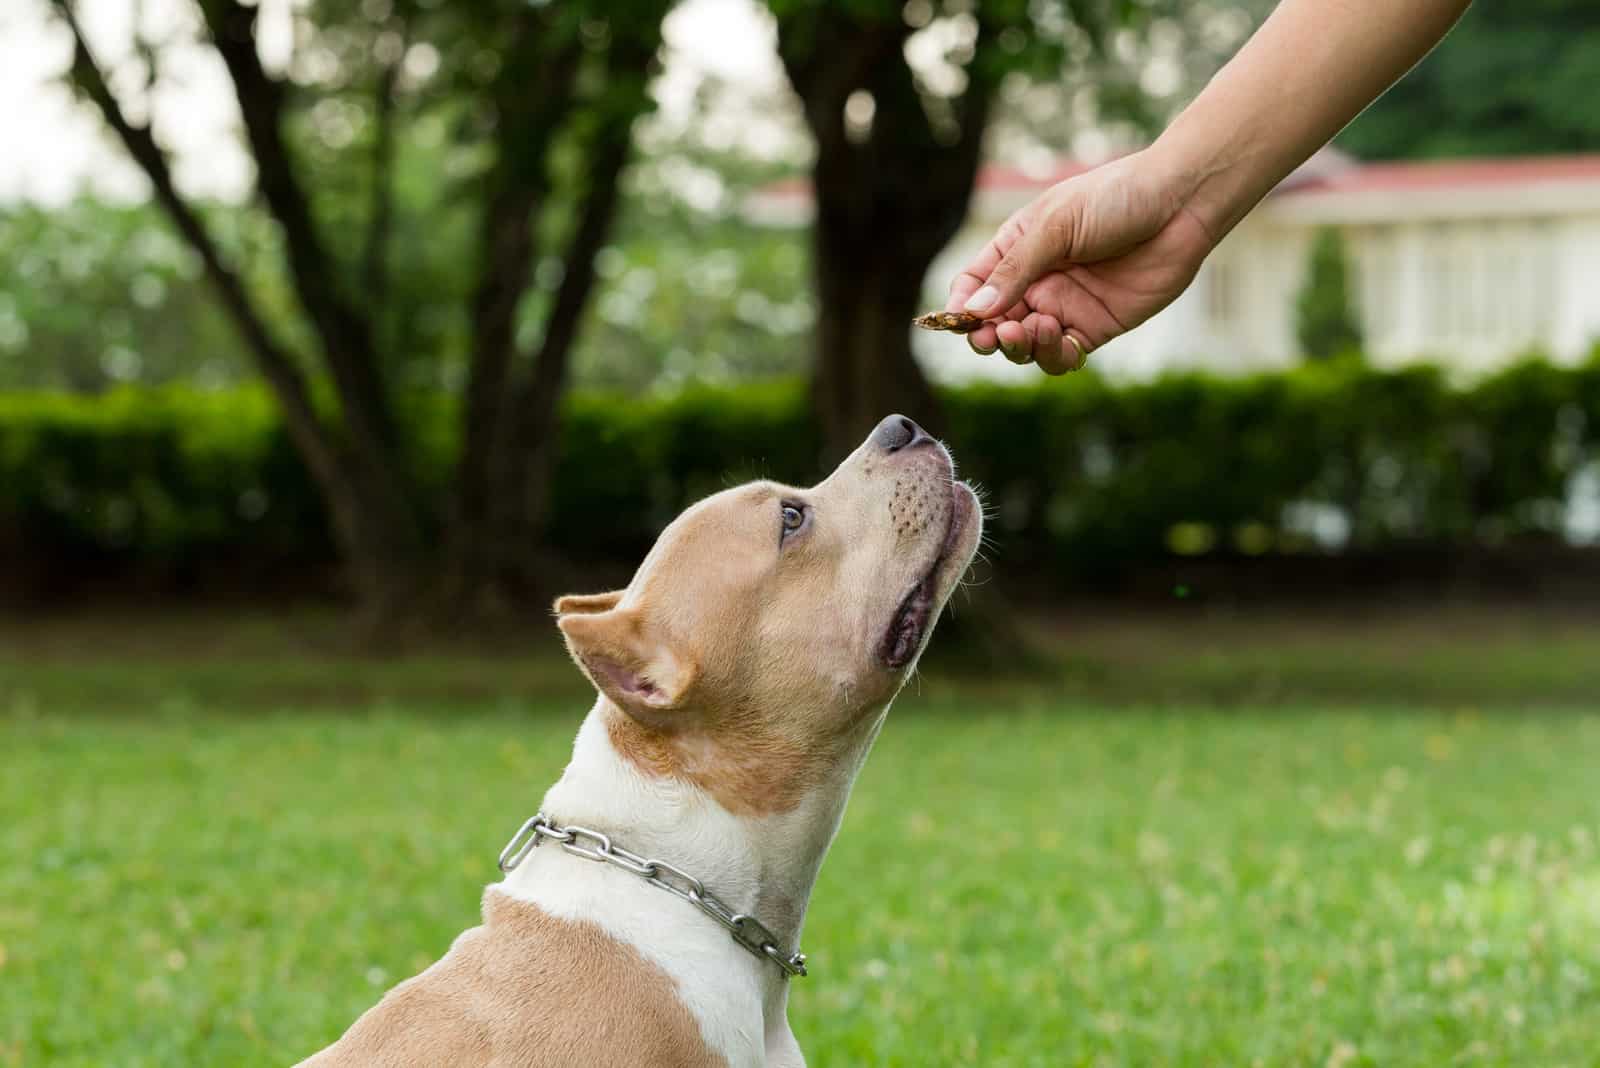 american bully being fed a treat